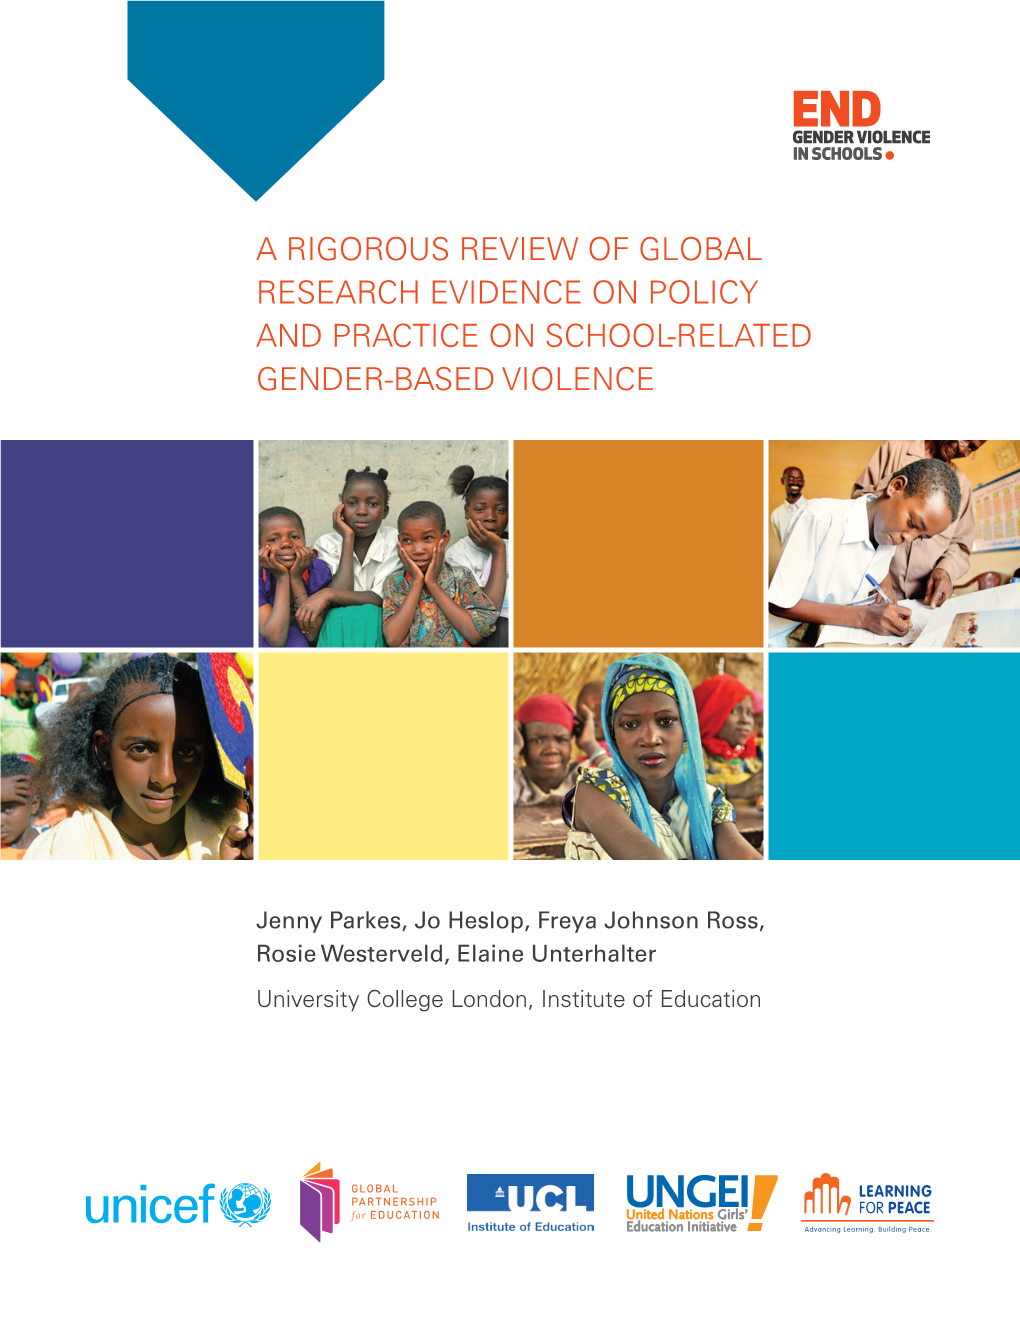 A Rigorous Review of Global Research Evidence on Policy and Practice on School-Related Gender-Based Violence